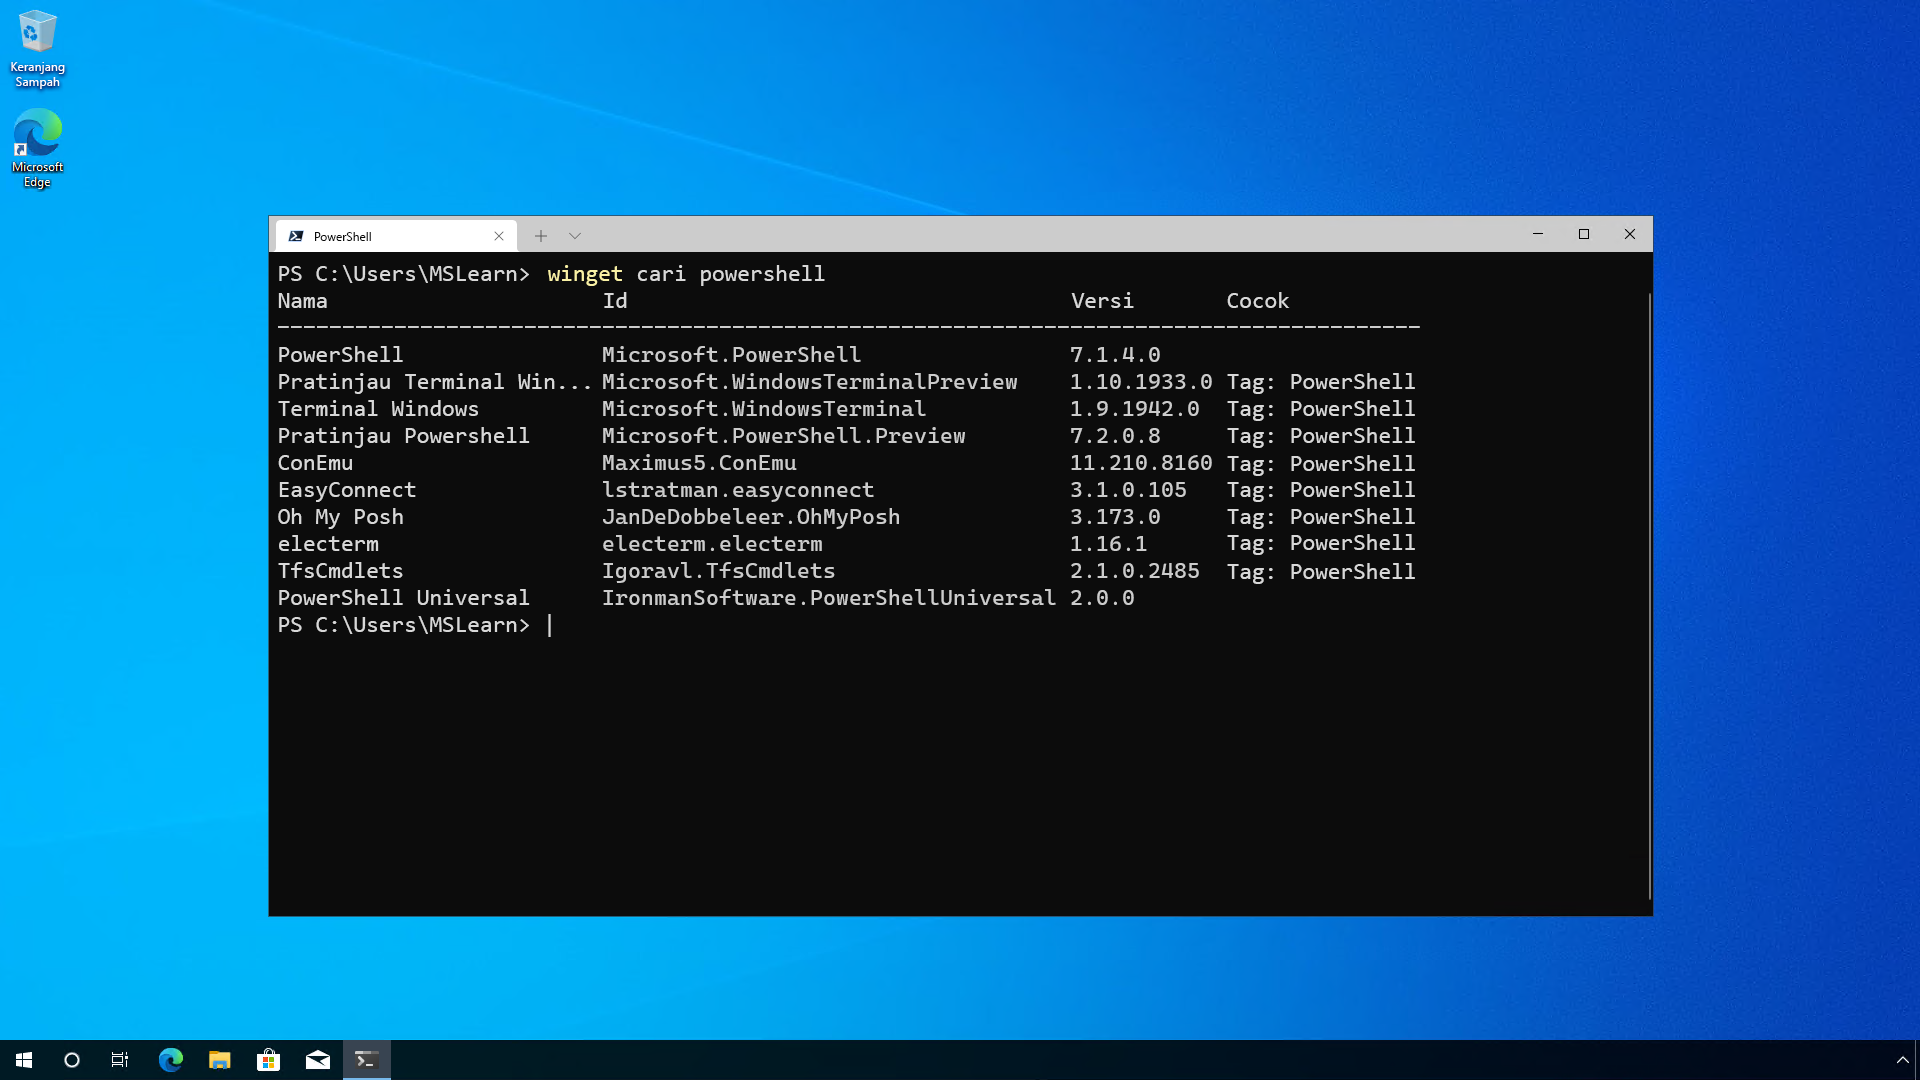 Windows Package Manager search results for PowerShell